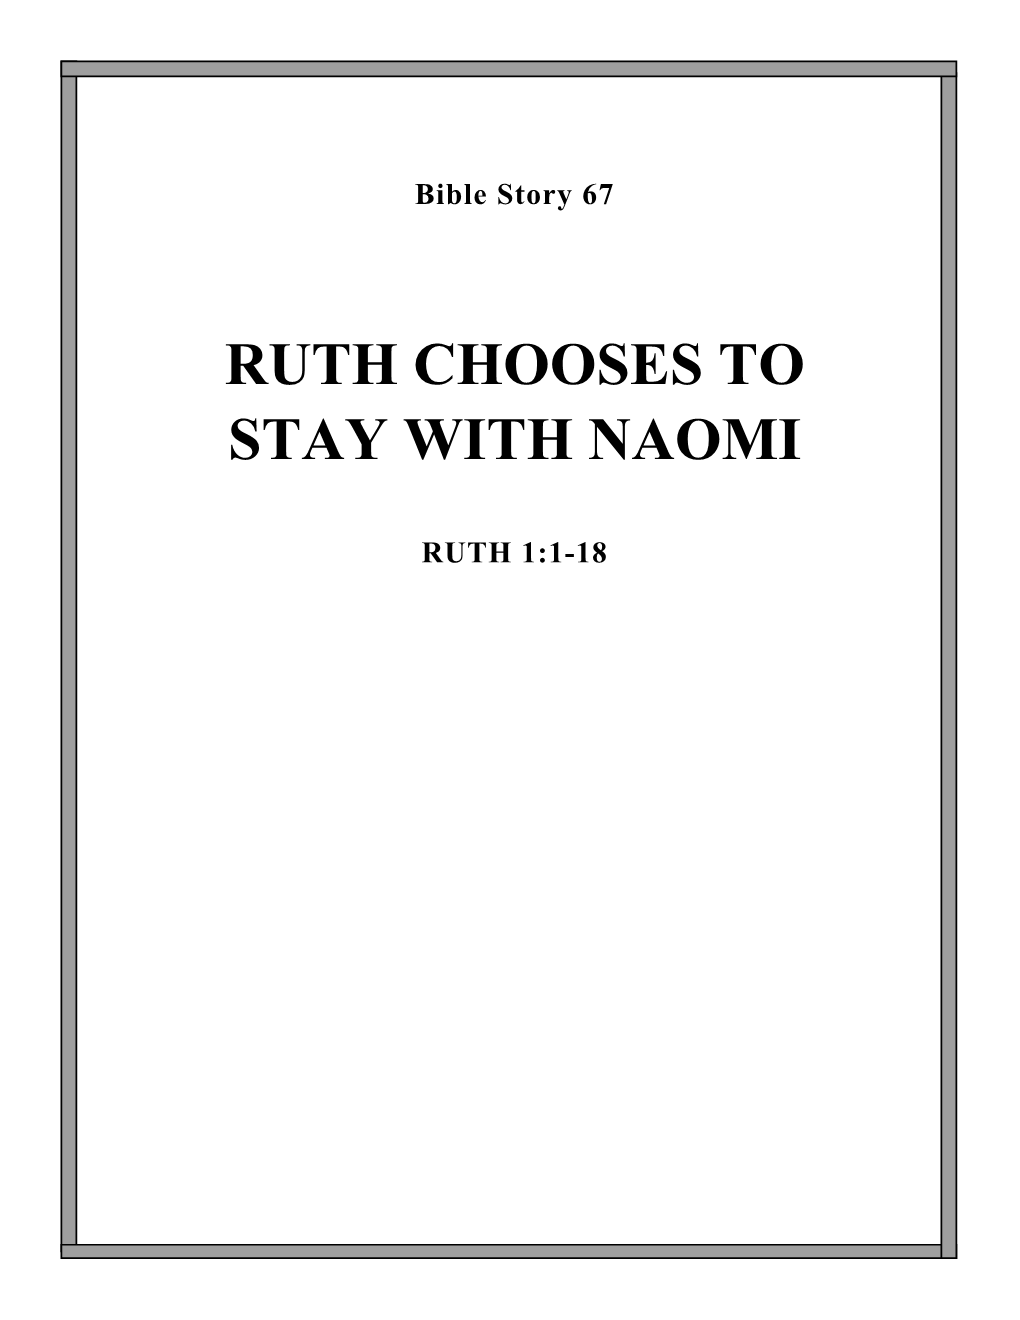 Ruth Chooses to Stay with Naomi